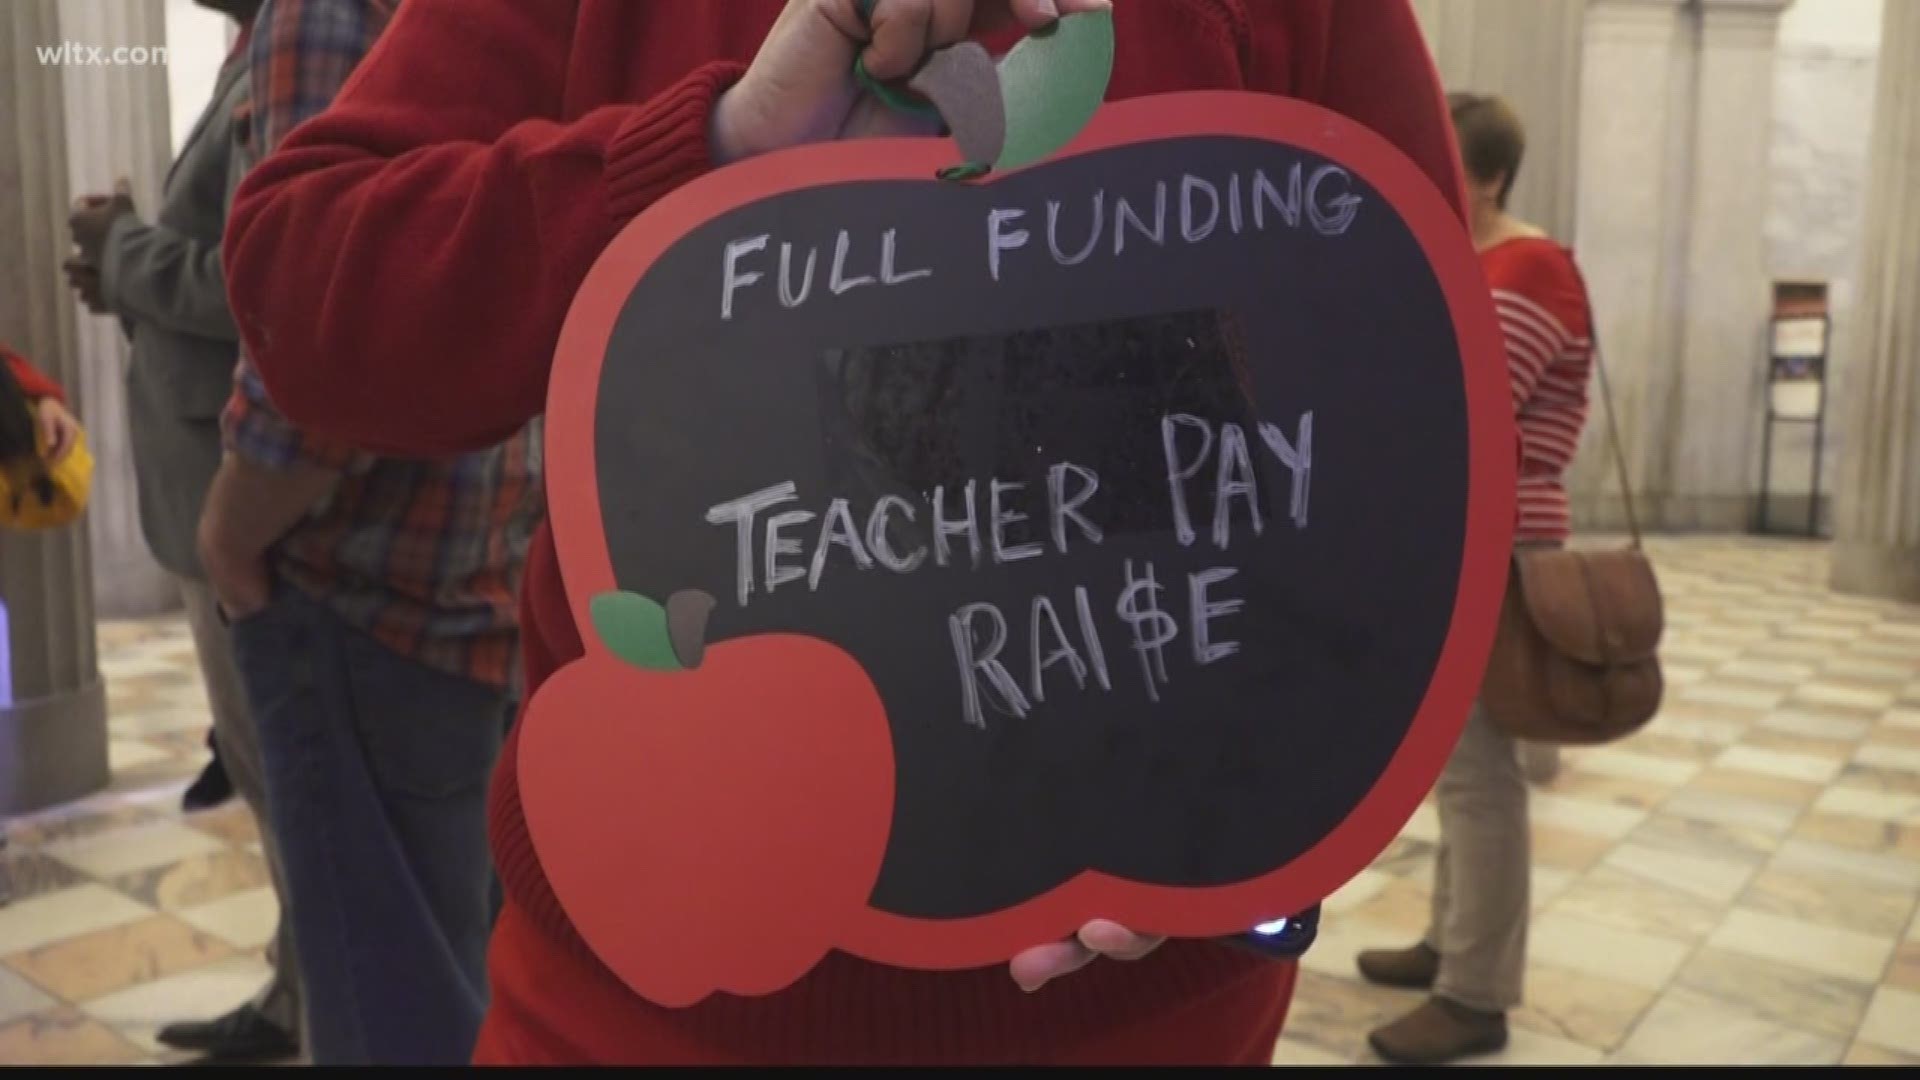 As state senators had the opportunity to pre-file legislation before noon on Wednesday, a group of current and former educators wanted to make sure their voice was heard in the State House lobby.